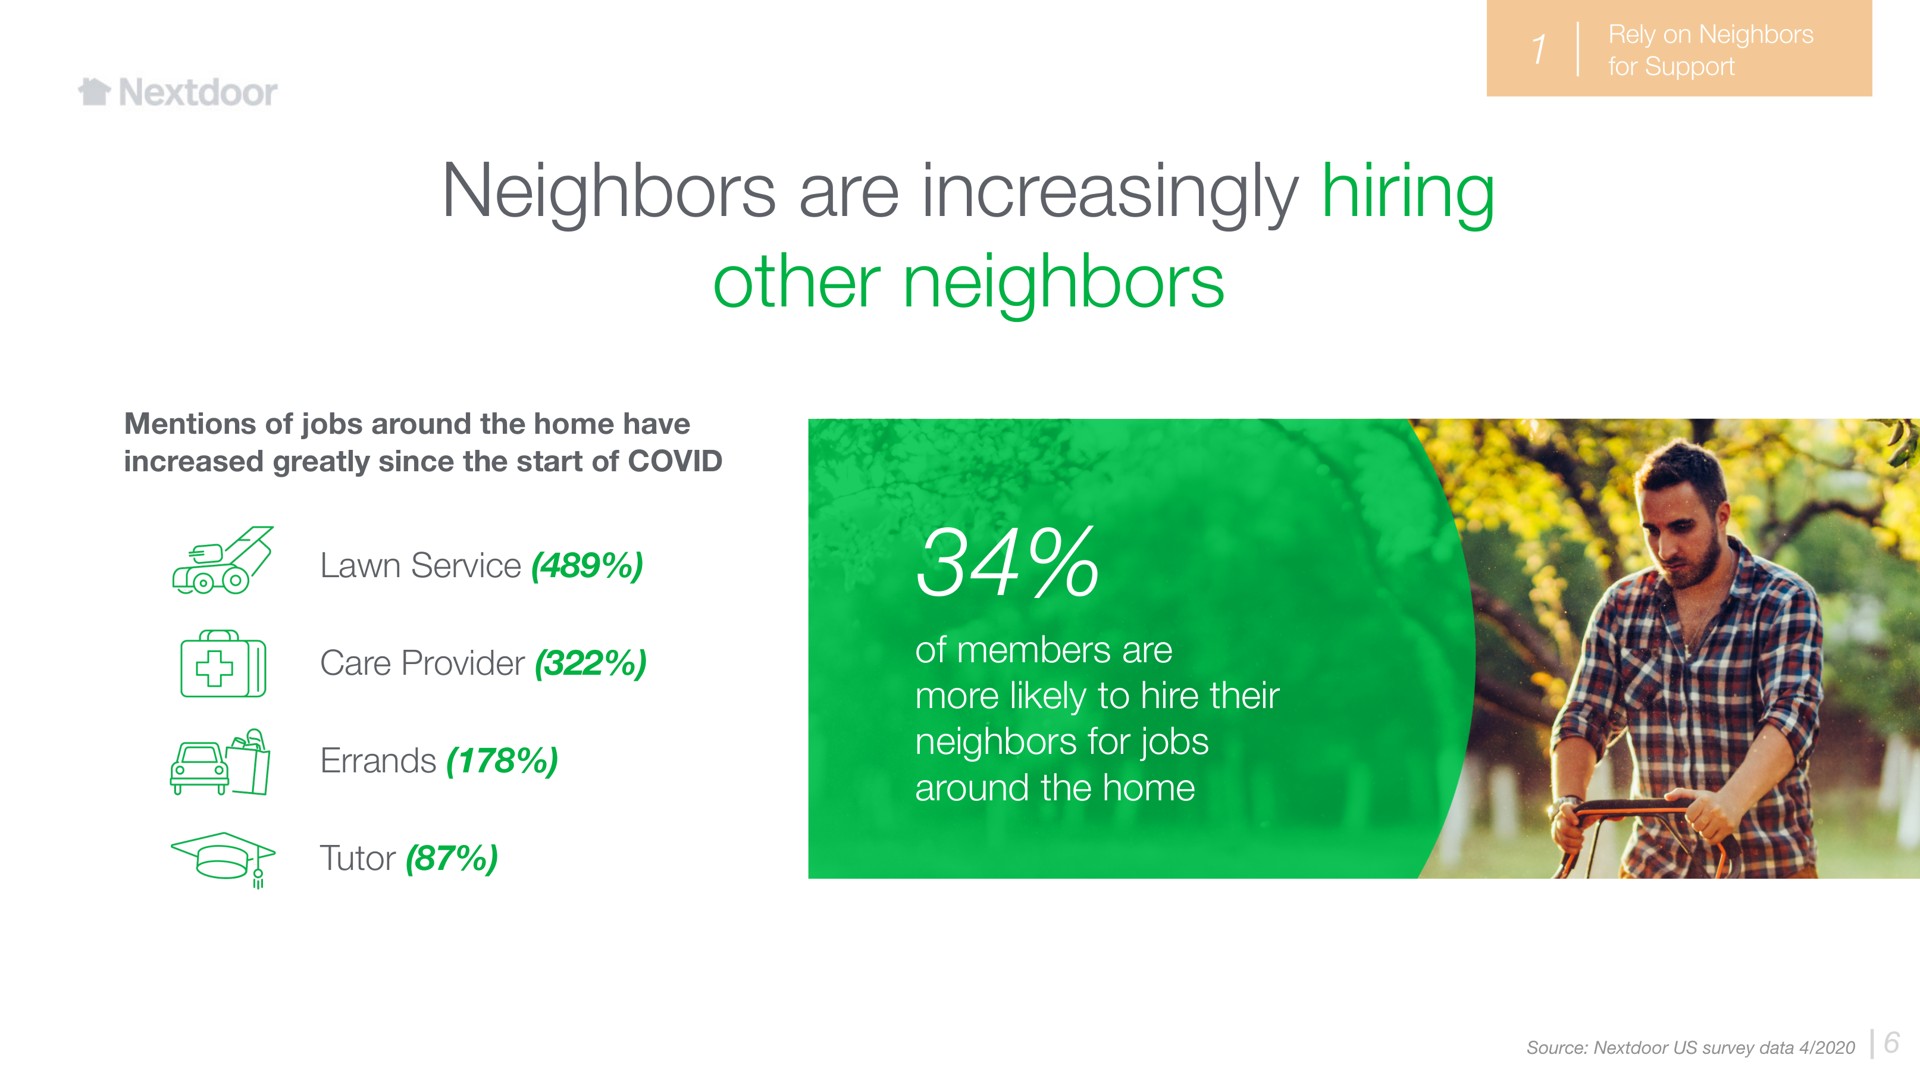 neighbors are increasingly hiring other neighbors mentions of jobs around the home have increased greatly since the start of covid lawn service care provider errands tutor of members are more likely to hire their neighbors for jobs around the home i err | Nextdoor